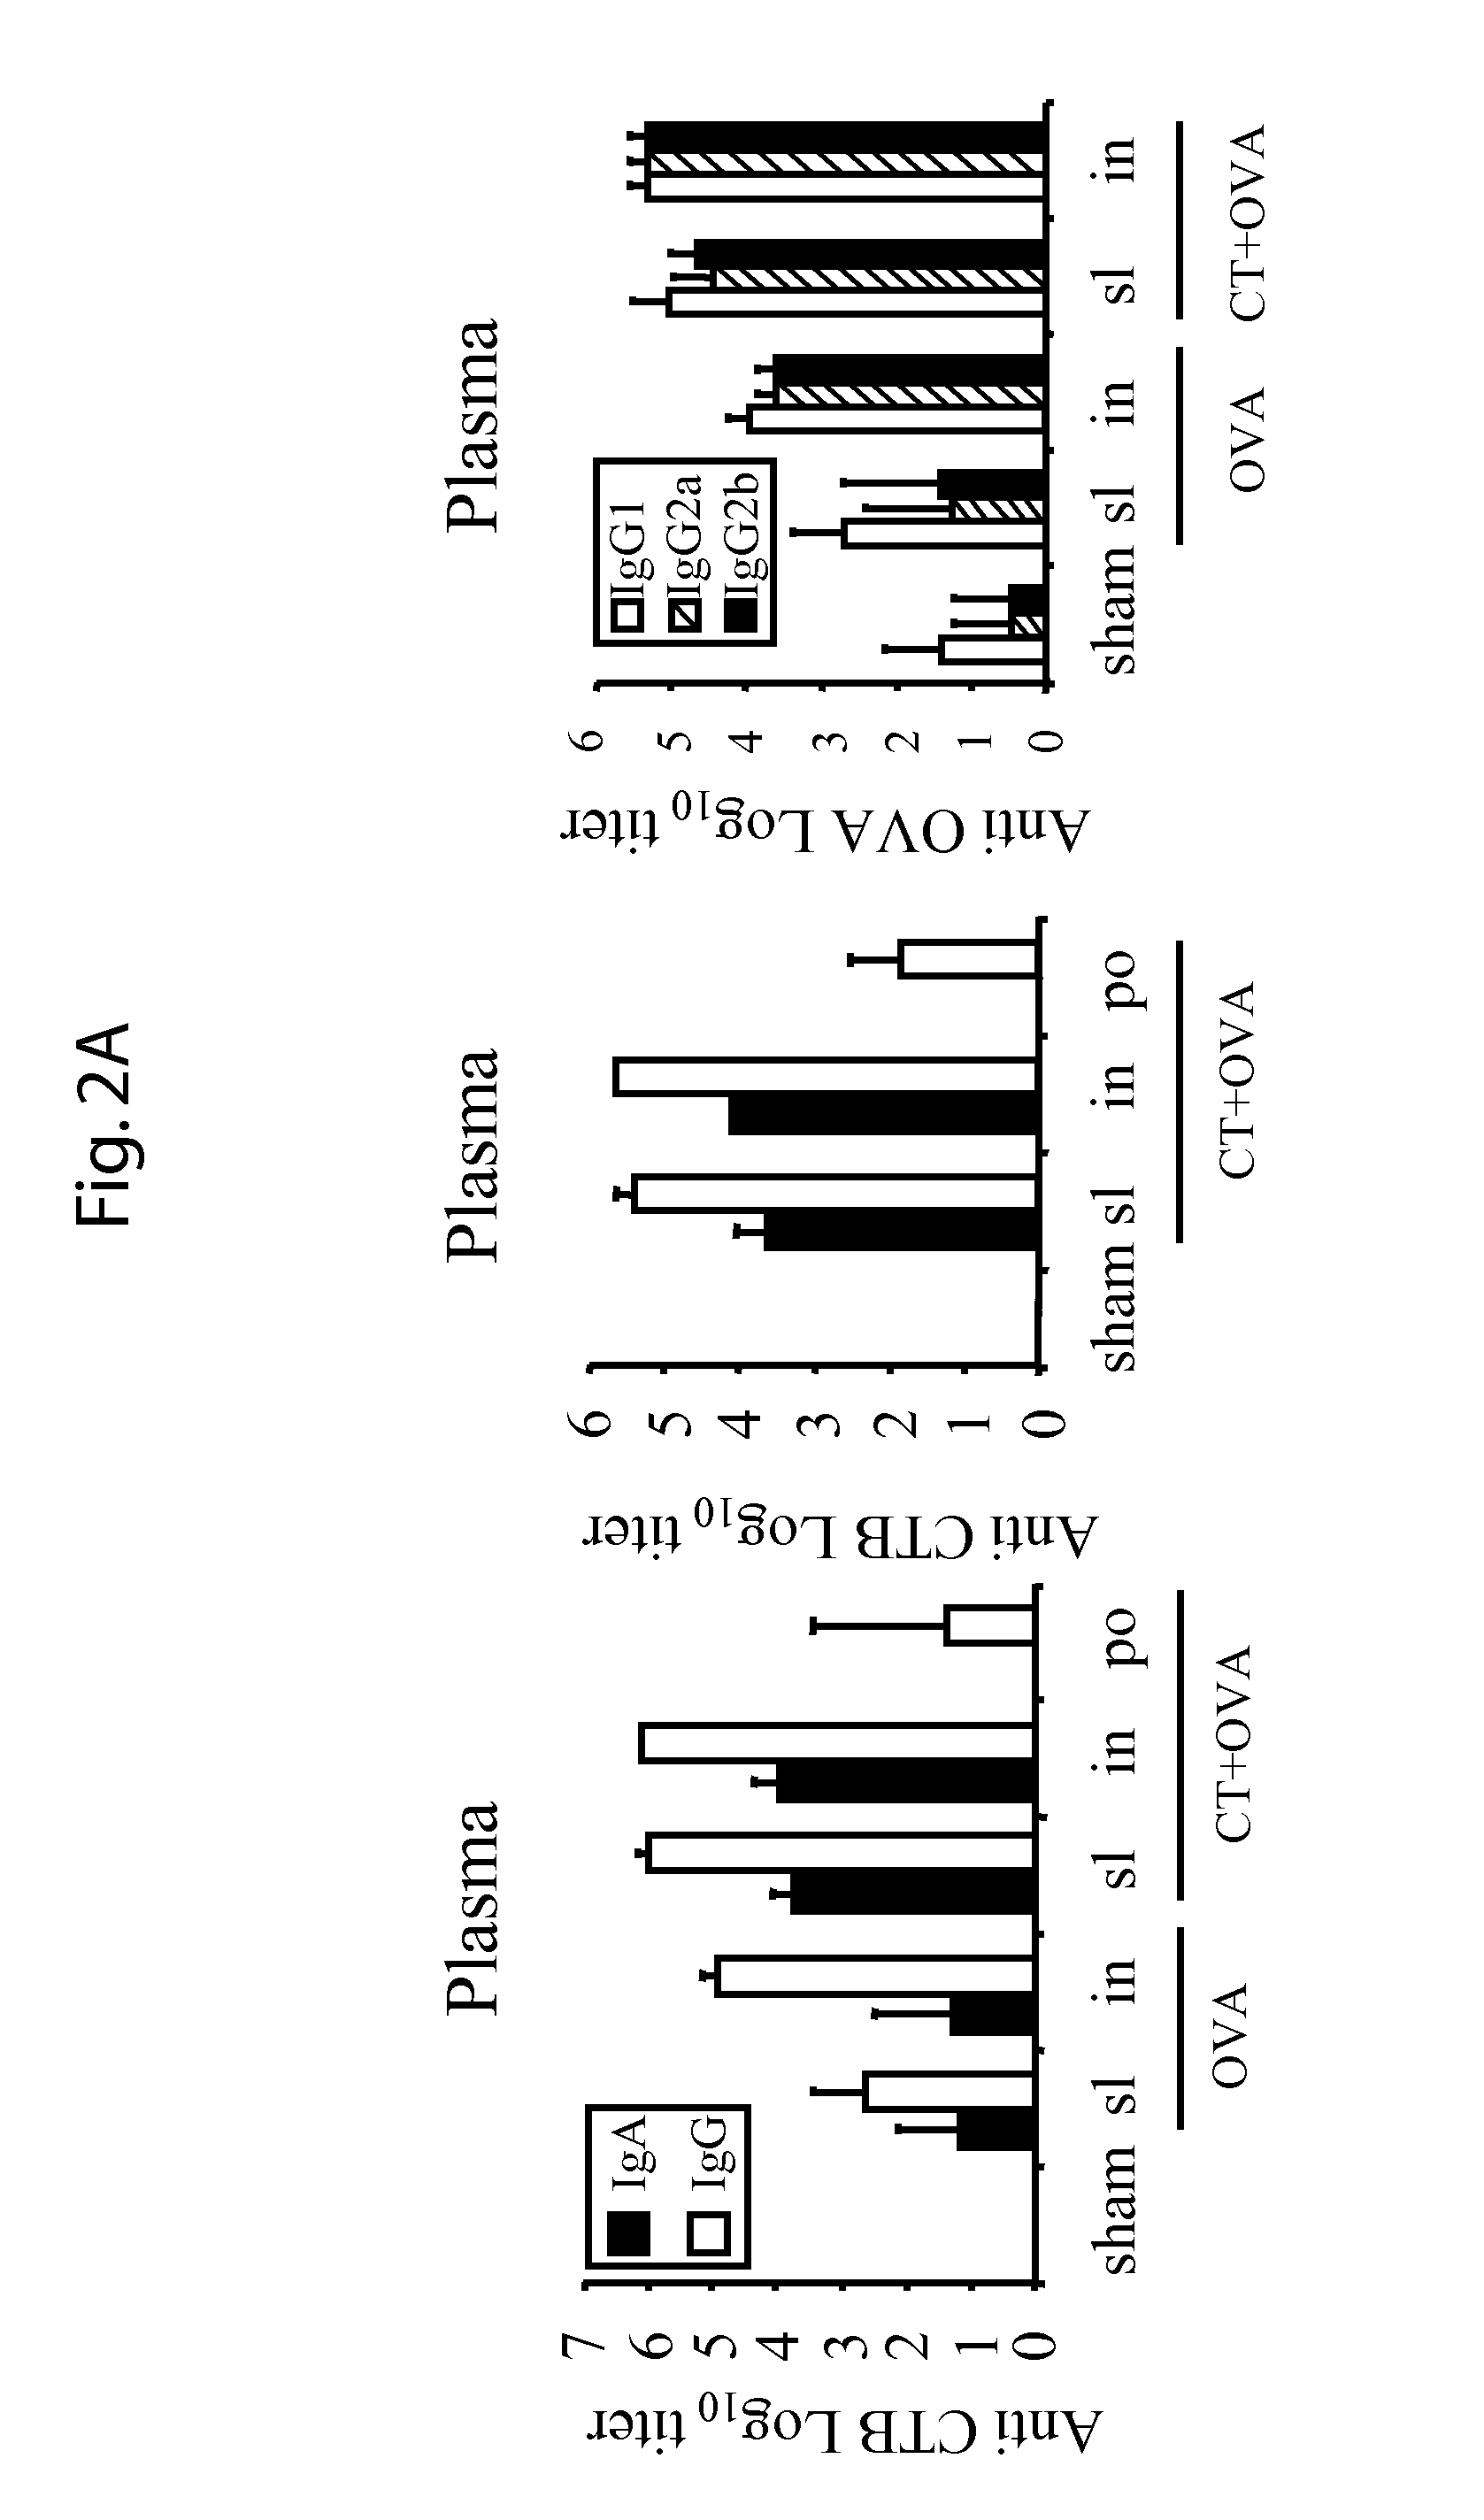 Method for inducing mucosal humoral and cell-mediated immune responses by sublingual administration of antigens